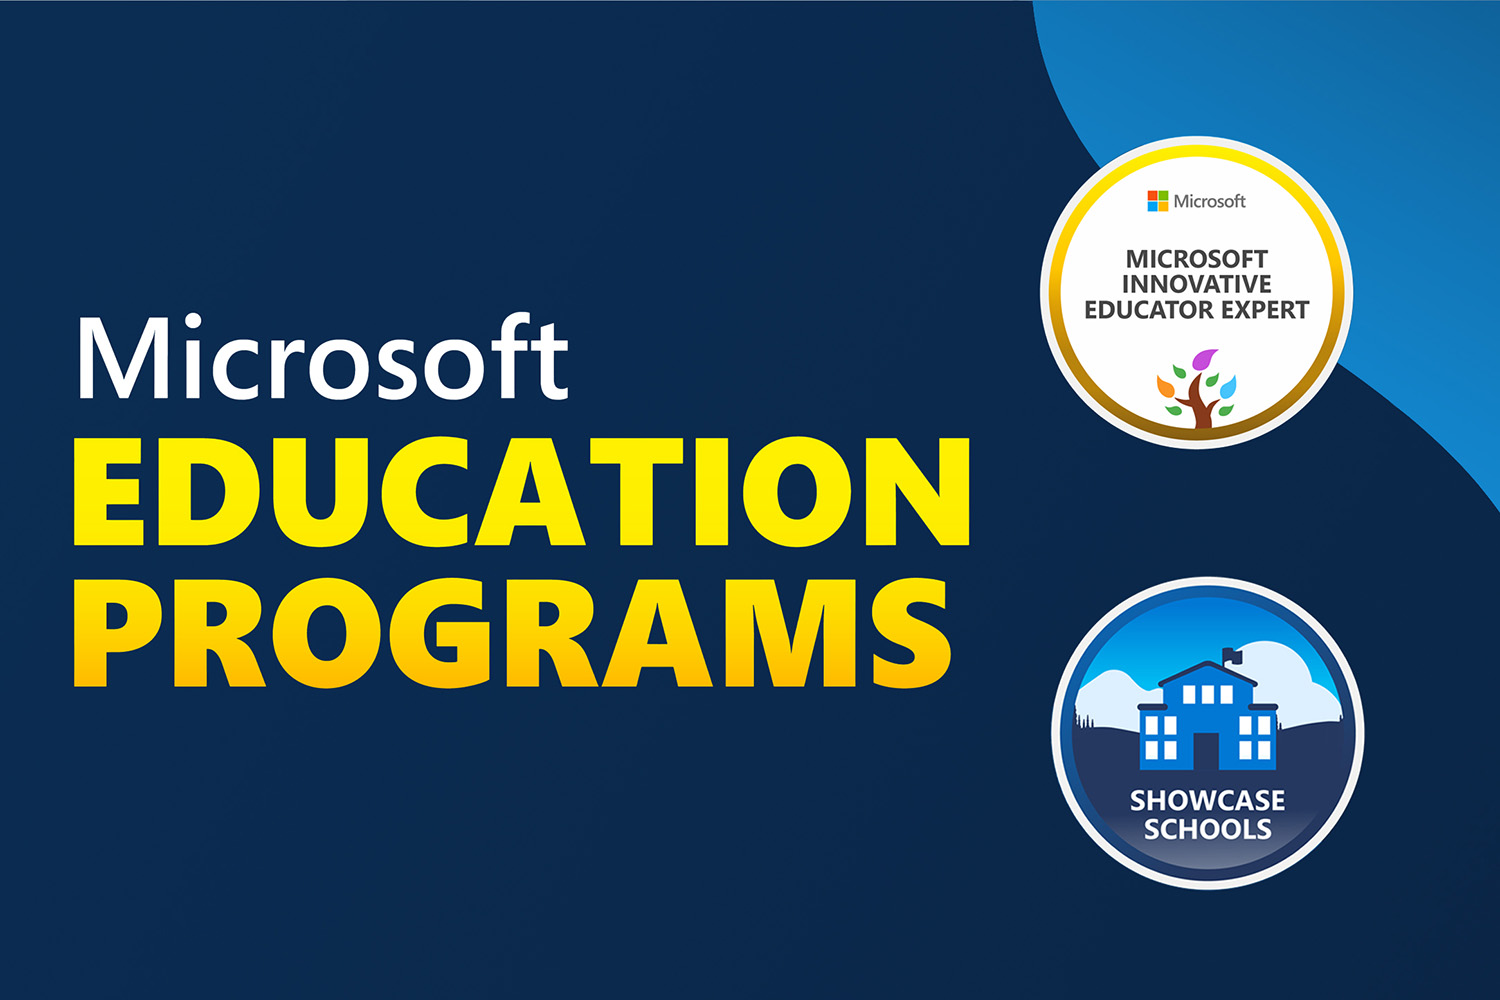 Graphic featuring the Microsoft Innovative Educator Expert logo and the Showcase Schools logo.